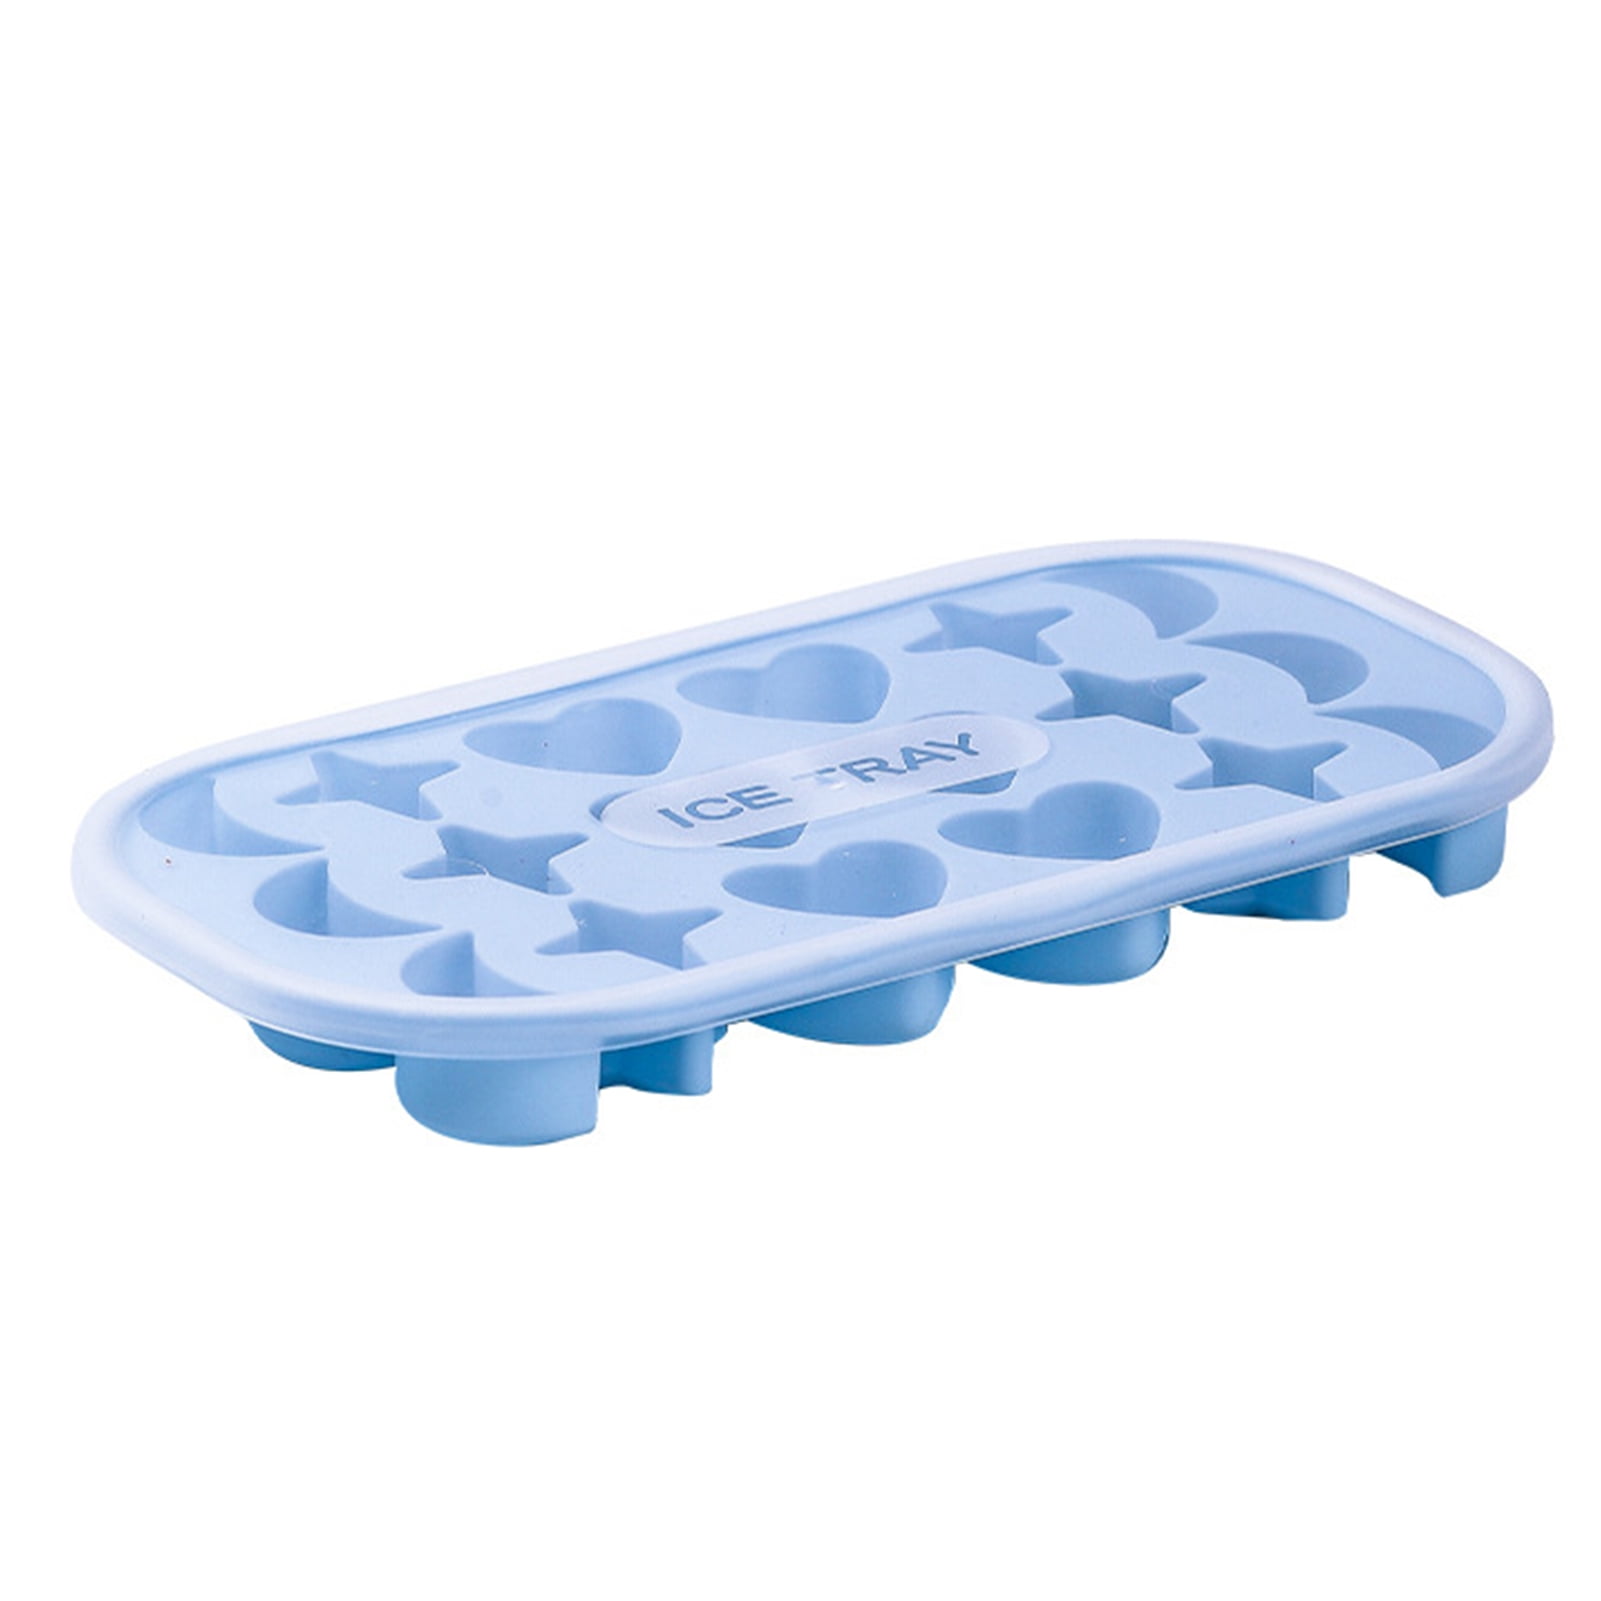 DOQAUS Ice Cube Trays 4 Pack, Easy-Release Silicone & Flexible 14-Ice Cube Trays with Spill-Resistant Removable Lid, Lfgb Certified and BPA Free, for